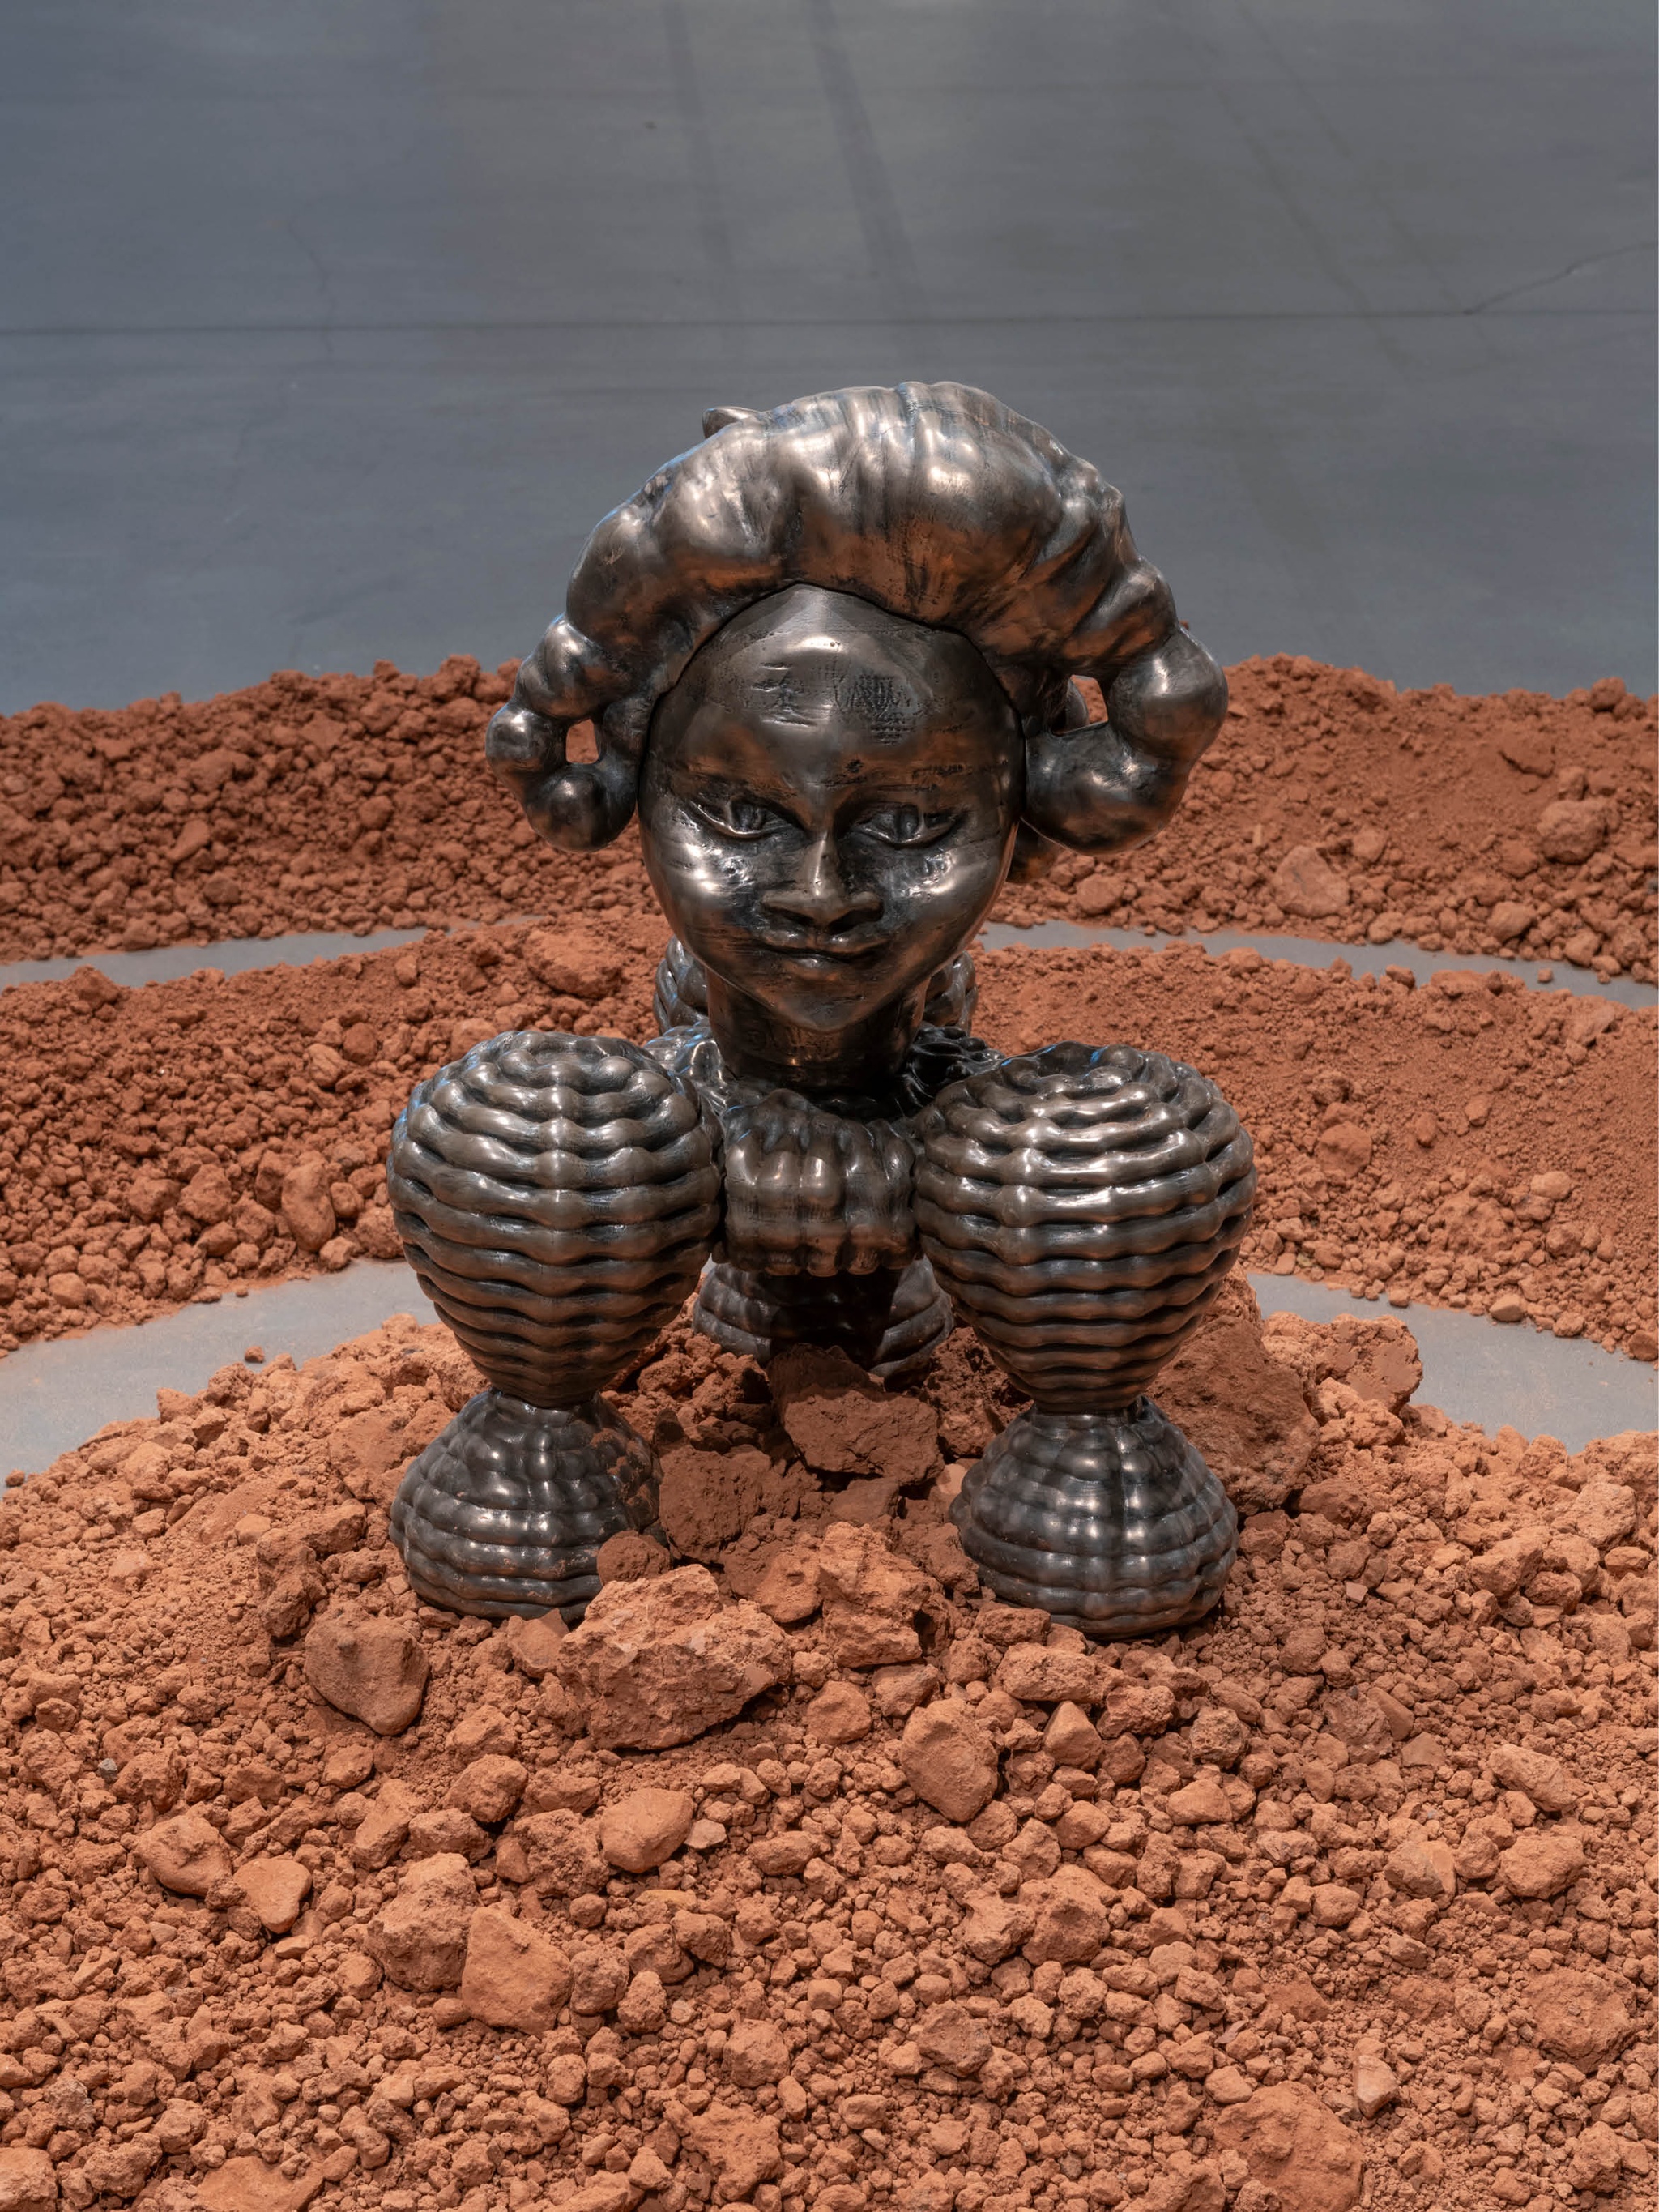 A wide sculptural artwork on a gallery floor. It consists of two concentric rings of red dirt. At the center on top of a mound of the dirt sits a bronze sculpture inspired by the Benin Bronzes, historical artworks from Benin, present-day Nigeria.